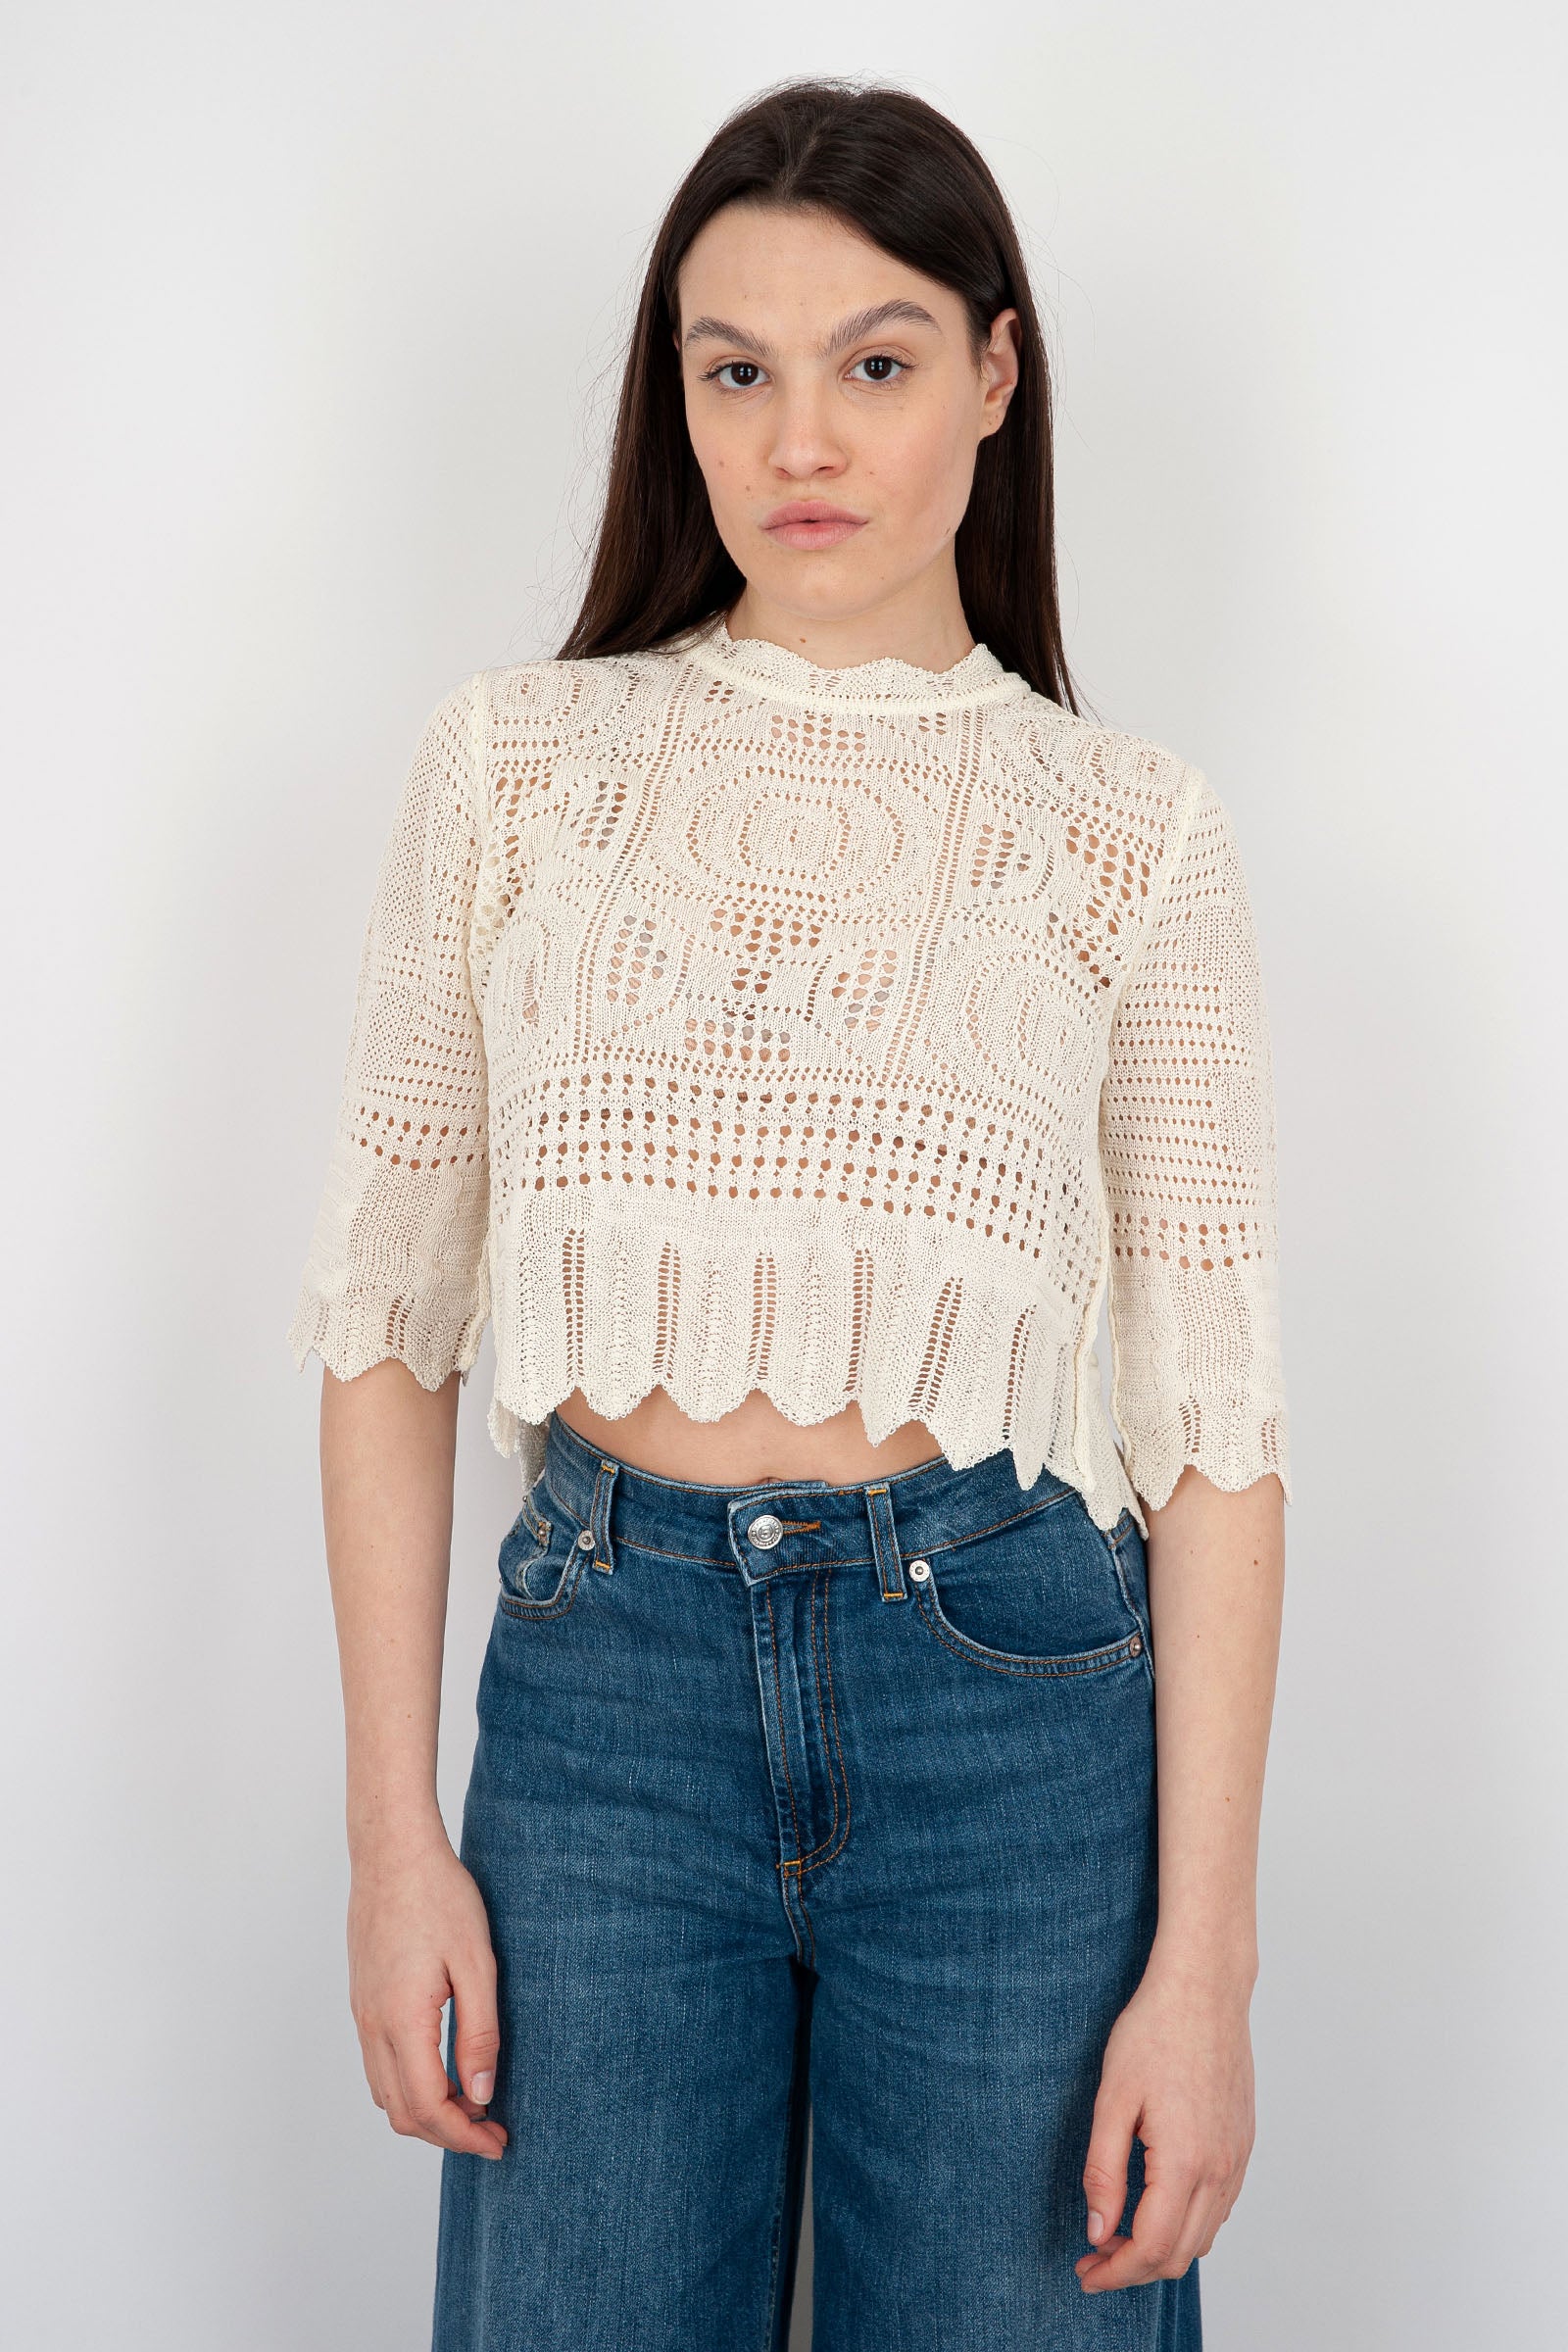 SemiCouture Grace Cotton Ivory Sweater - 1